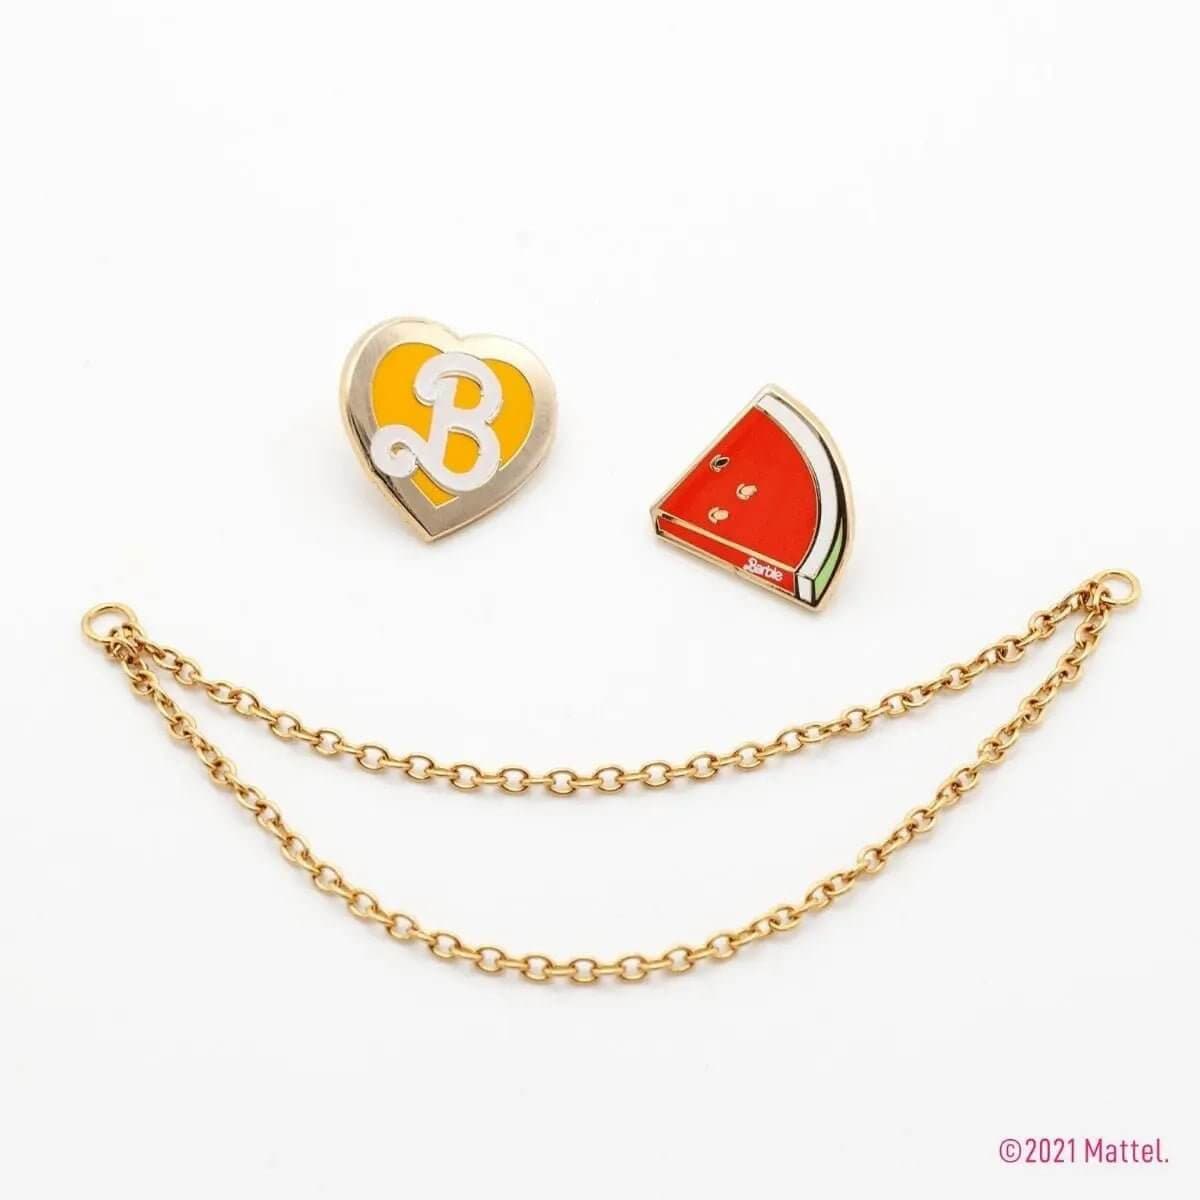 Barbie B Heart and Watermelon Pins with Removable Chains - Simon's Collectibles